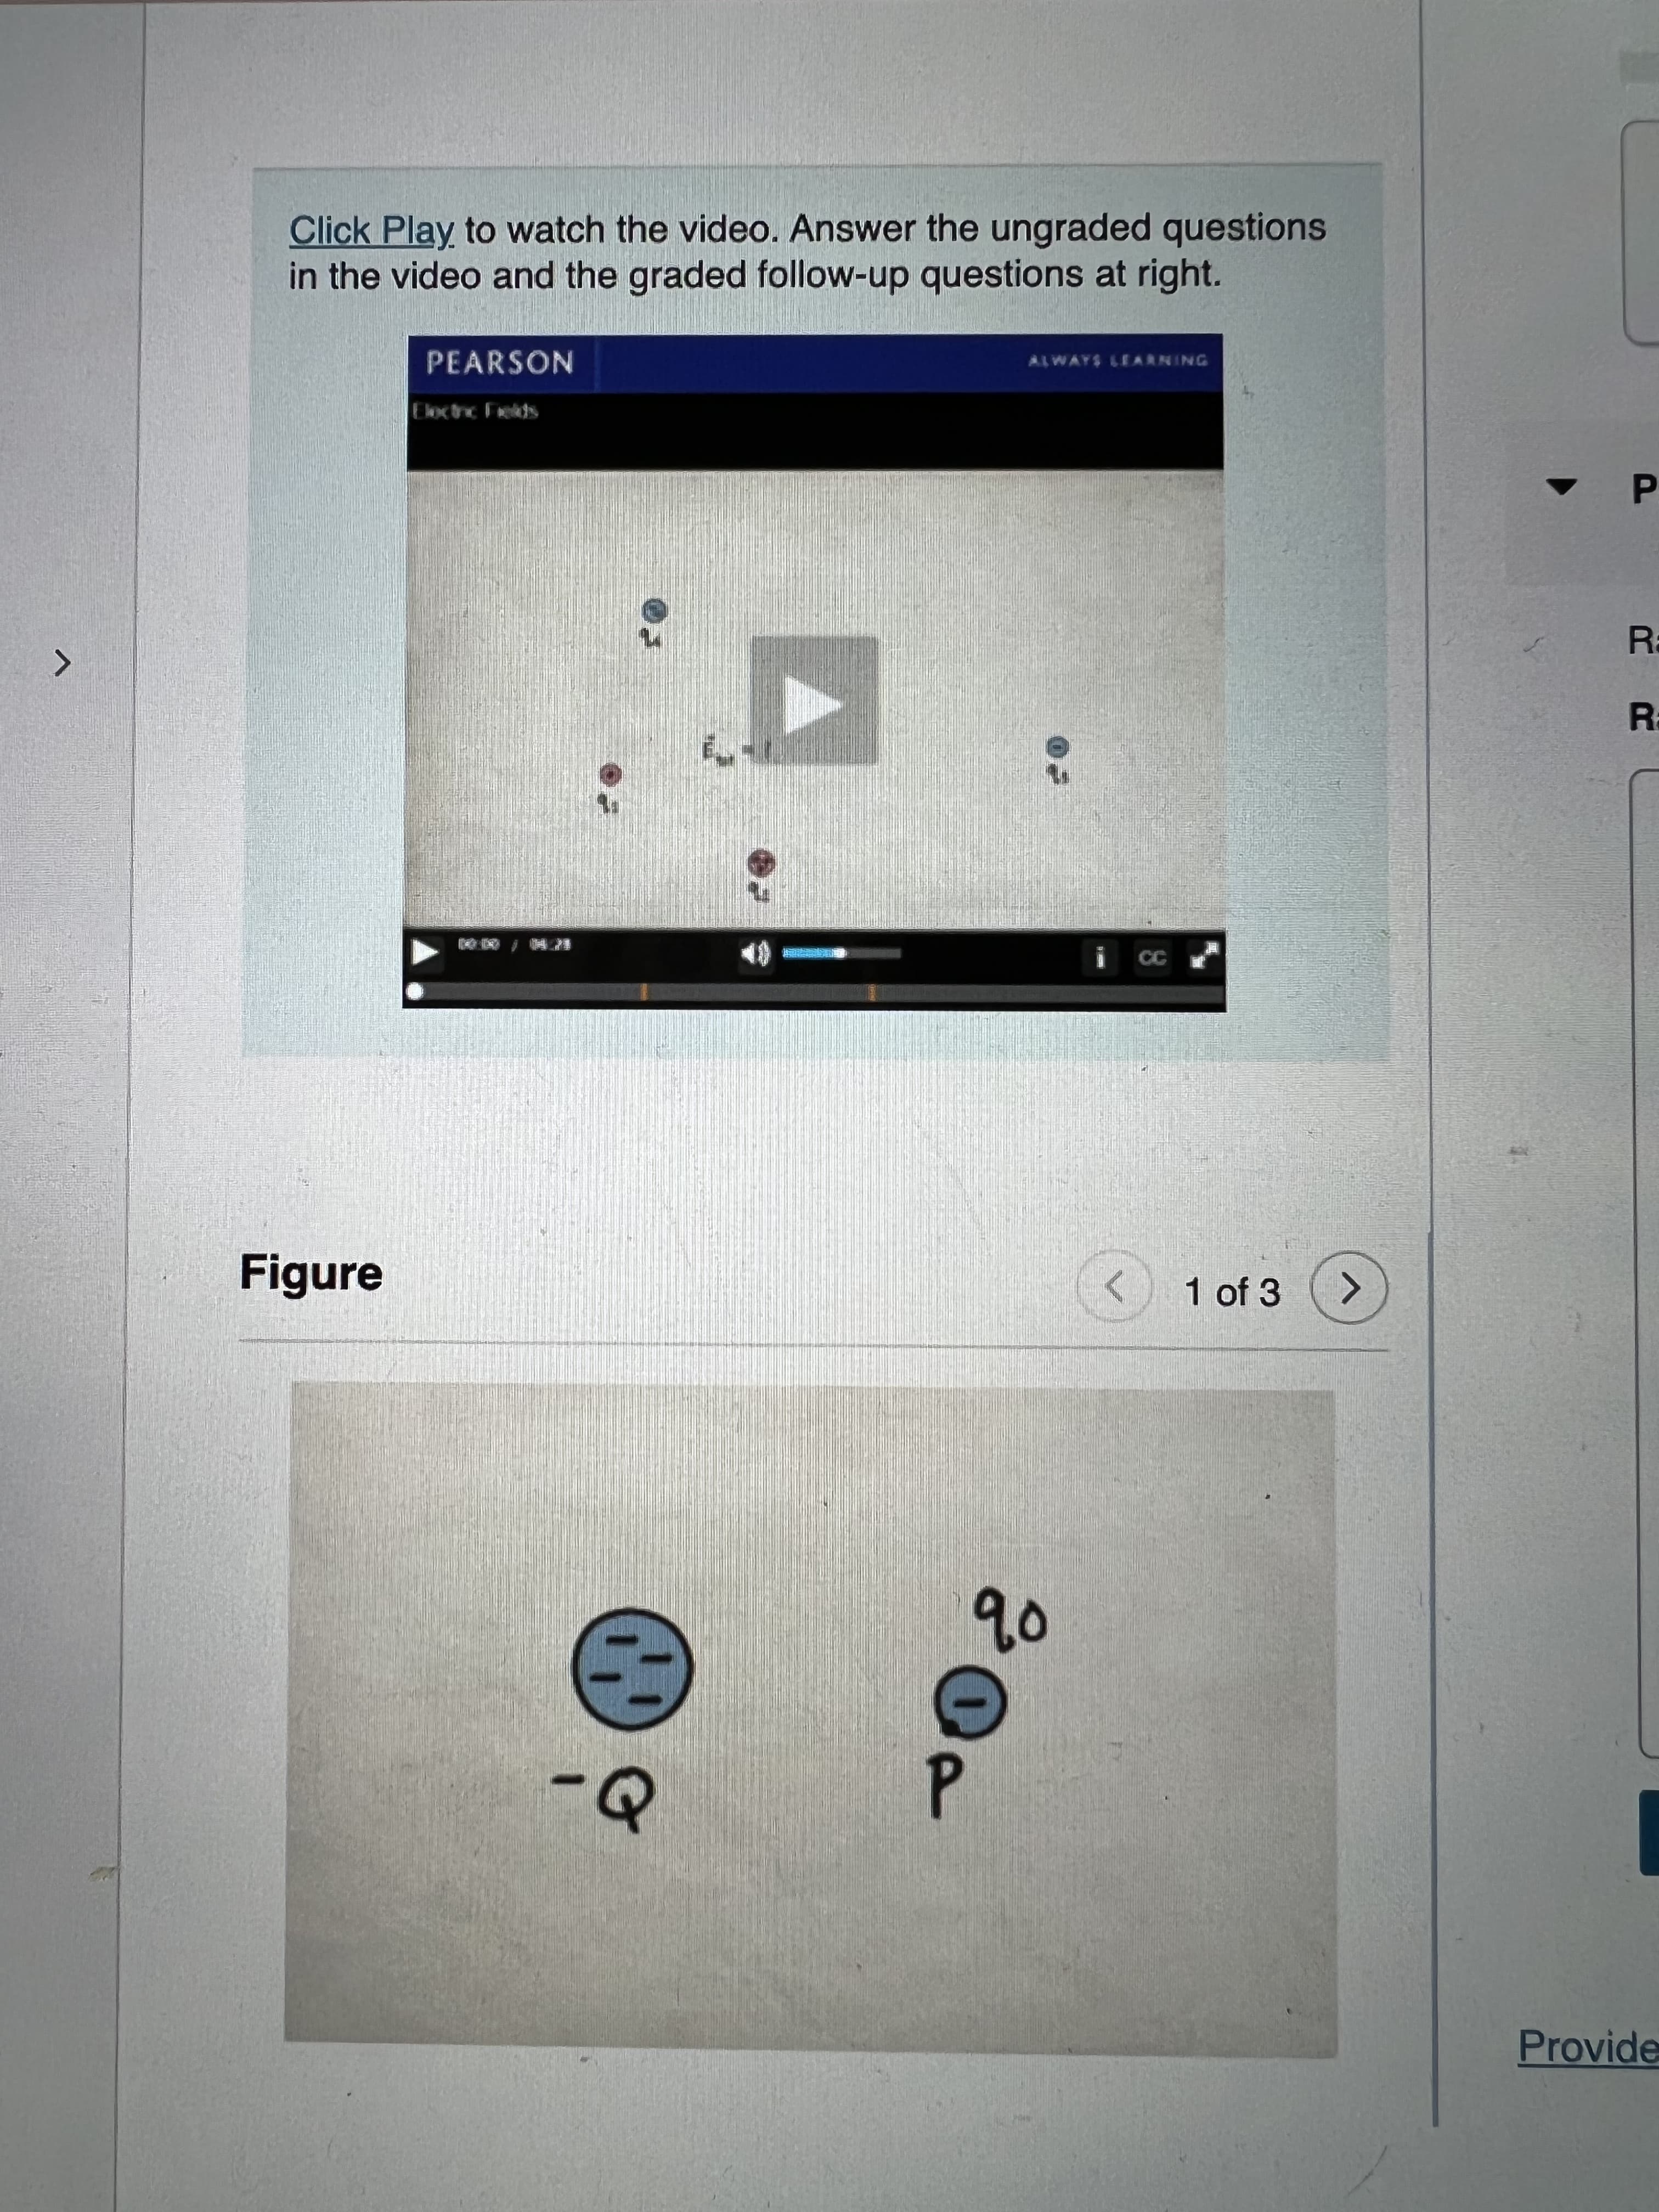 Click Play to watch the video. Answer the ungraded questions
in the video and the graded follow-up questions at right.
PEARSON
ALWAYS LEARNING
Eloctnc Fields
P.
Ra
CC
Figure
1 of 3
Provide
